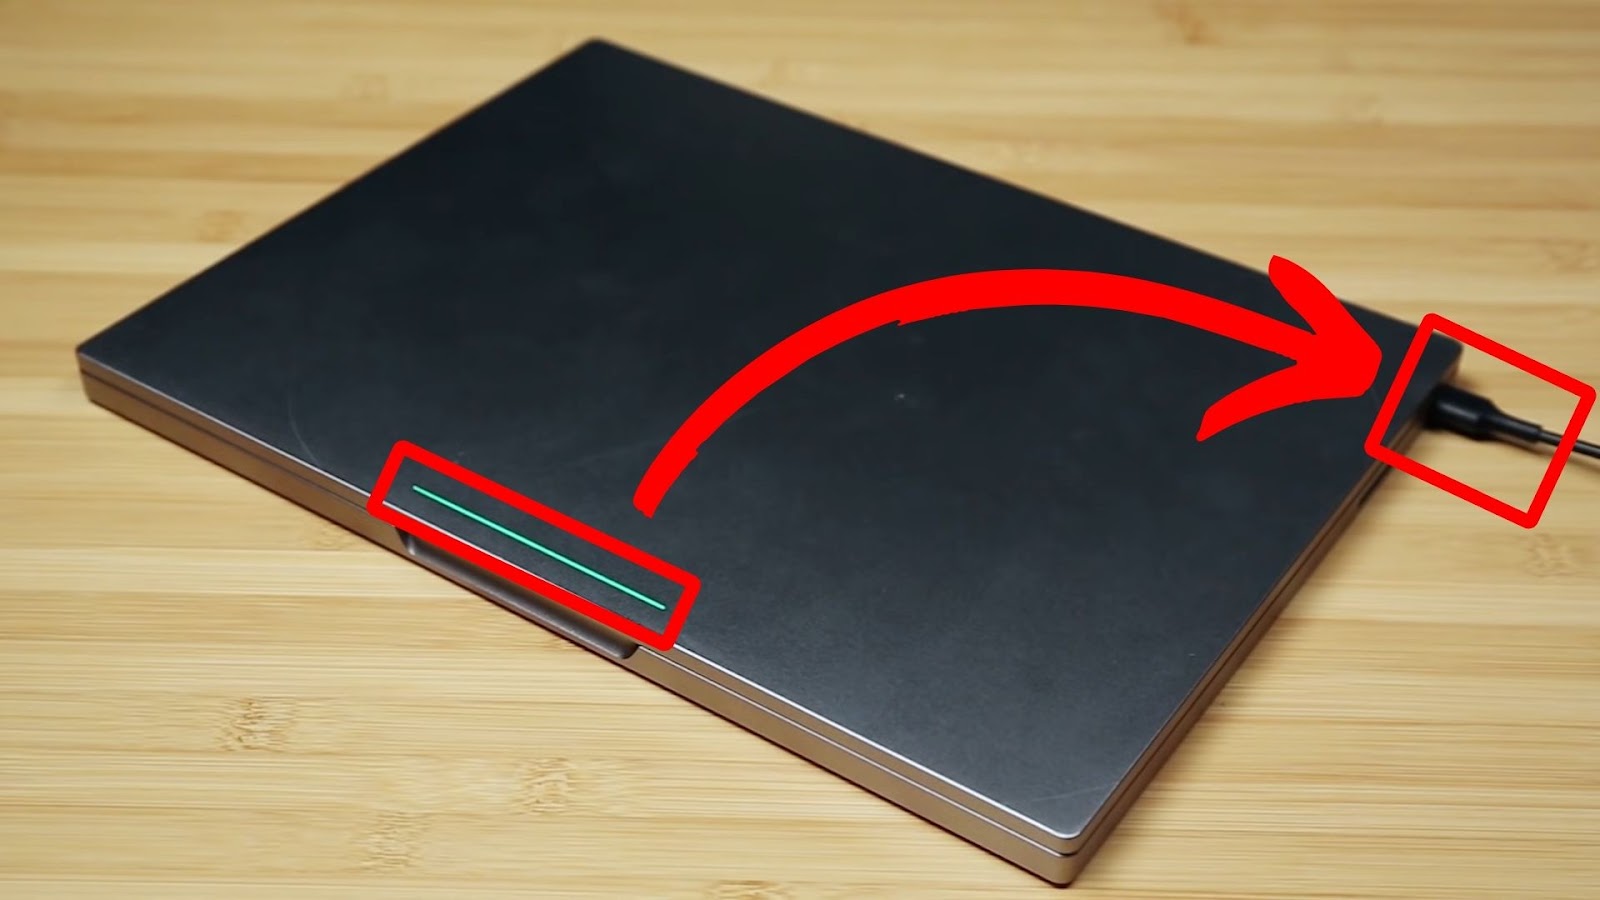 Check the Charging Indicator Light - Charge the Chromebook